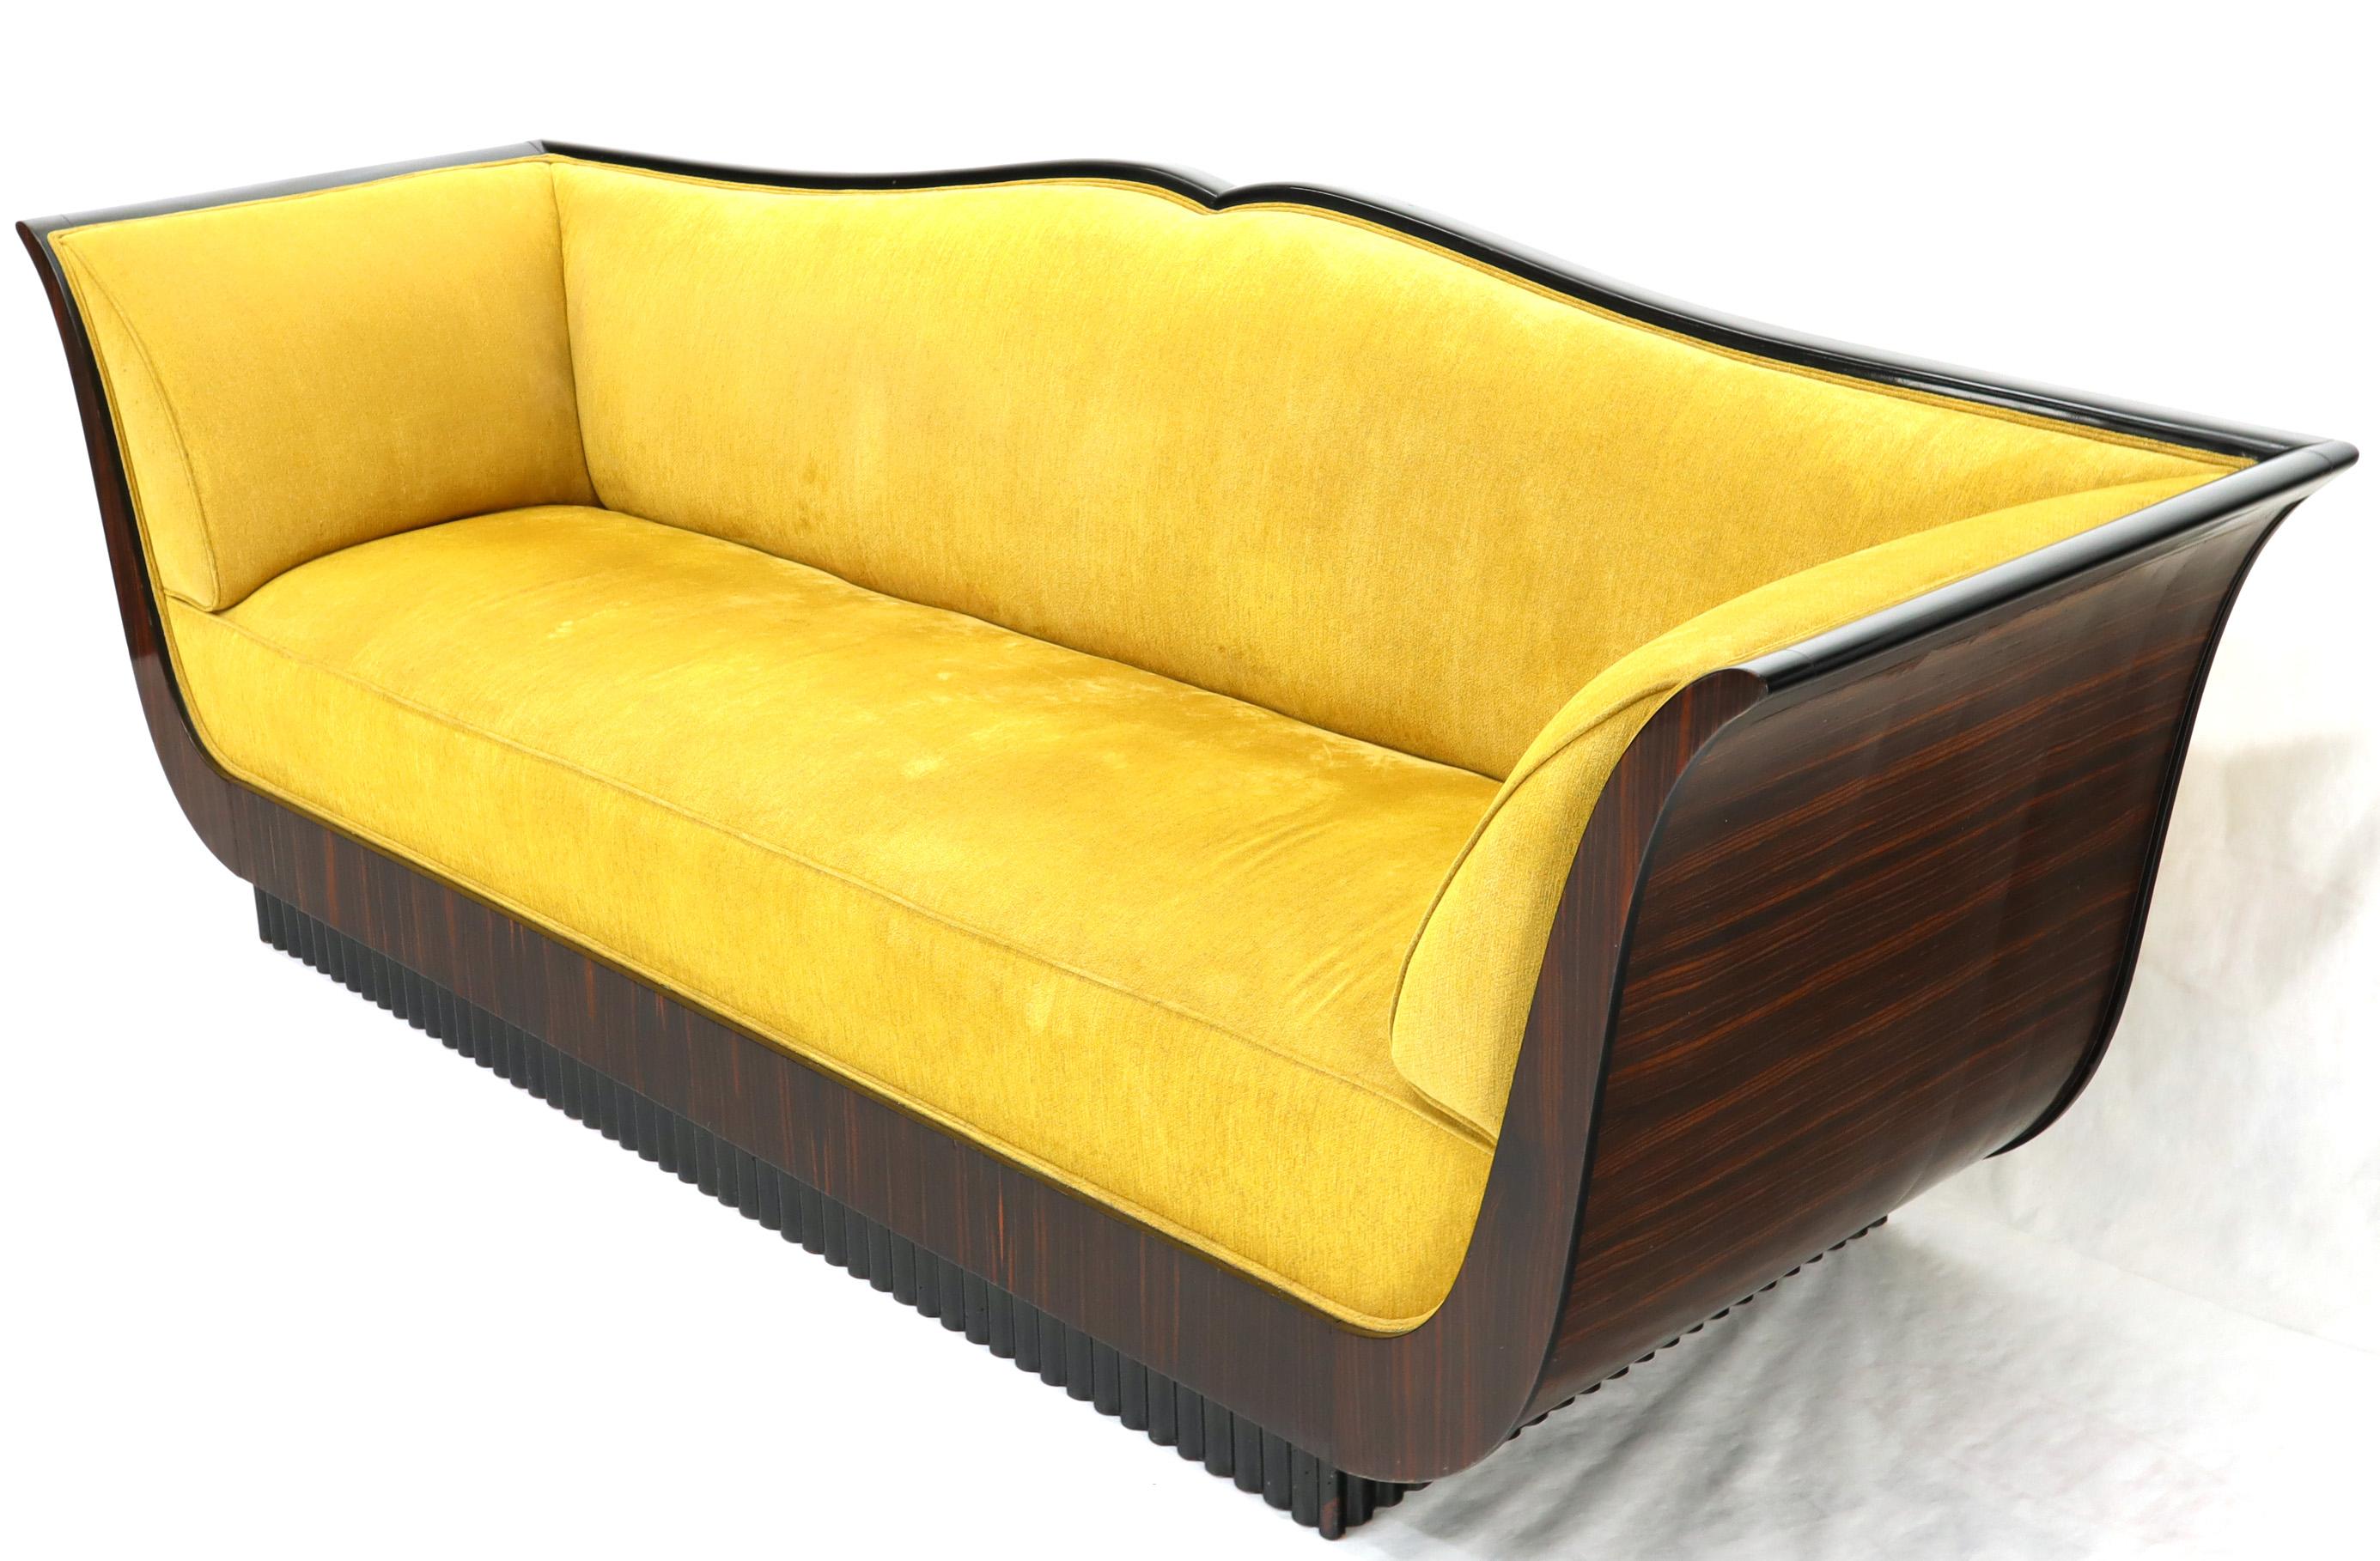 20th Century Large French Art Deco Rosewood Sofa in Gold Upholstery Scalloped Edge For Sale